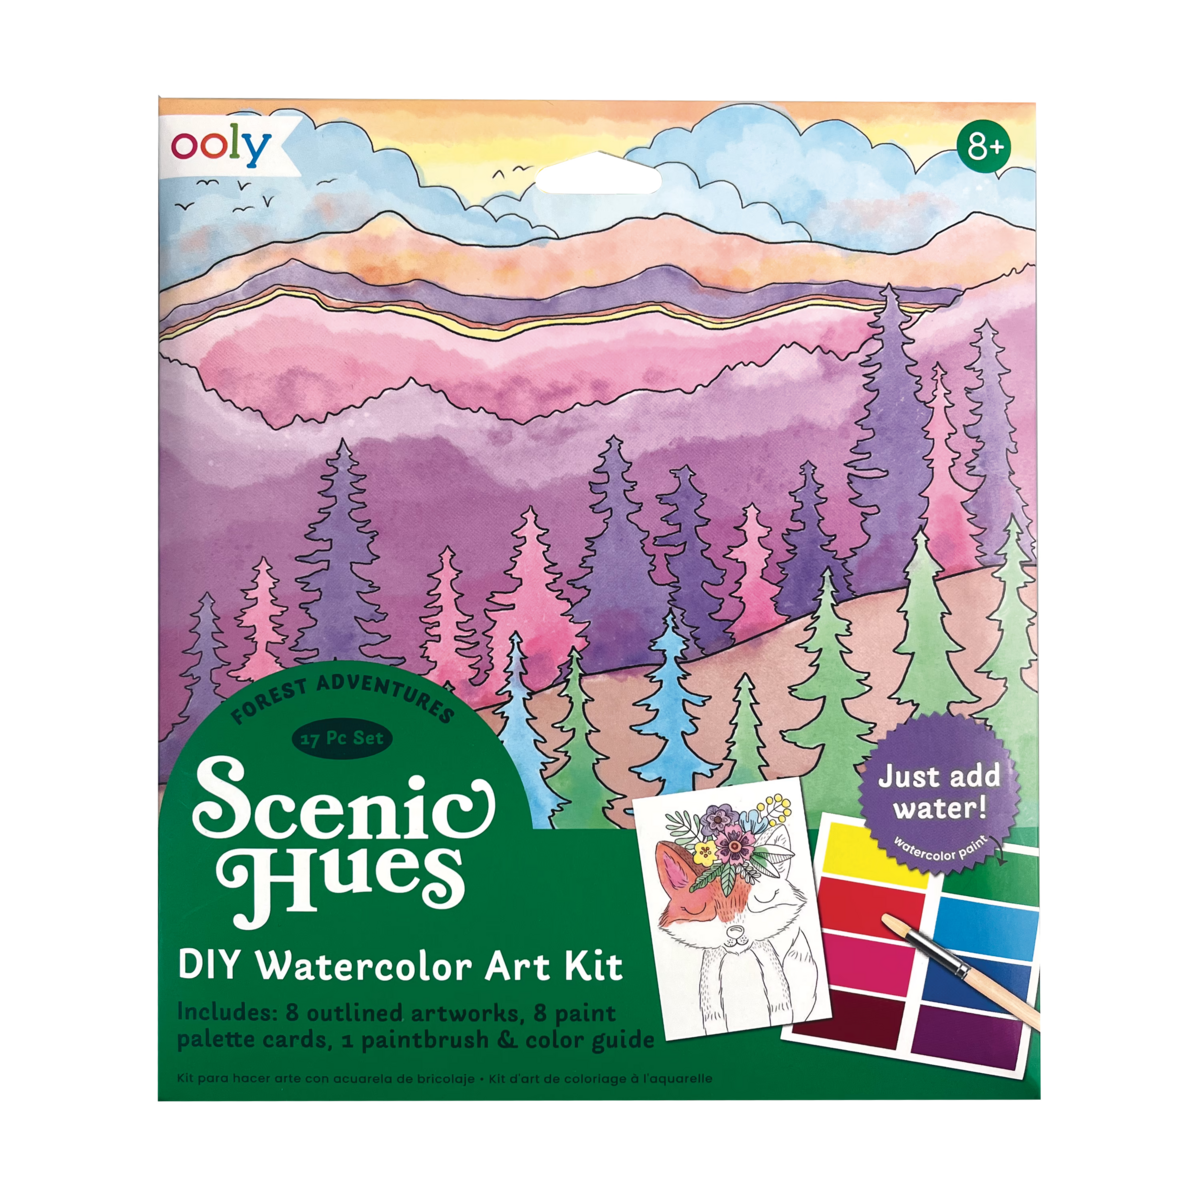 Forest Adventure Scenic Hues DIY watercolor art kit packaging front